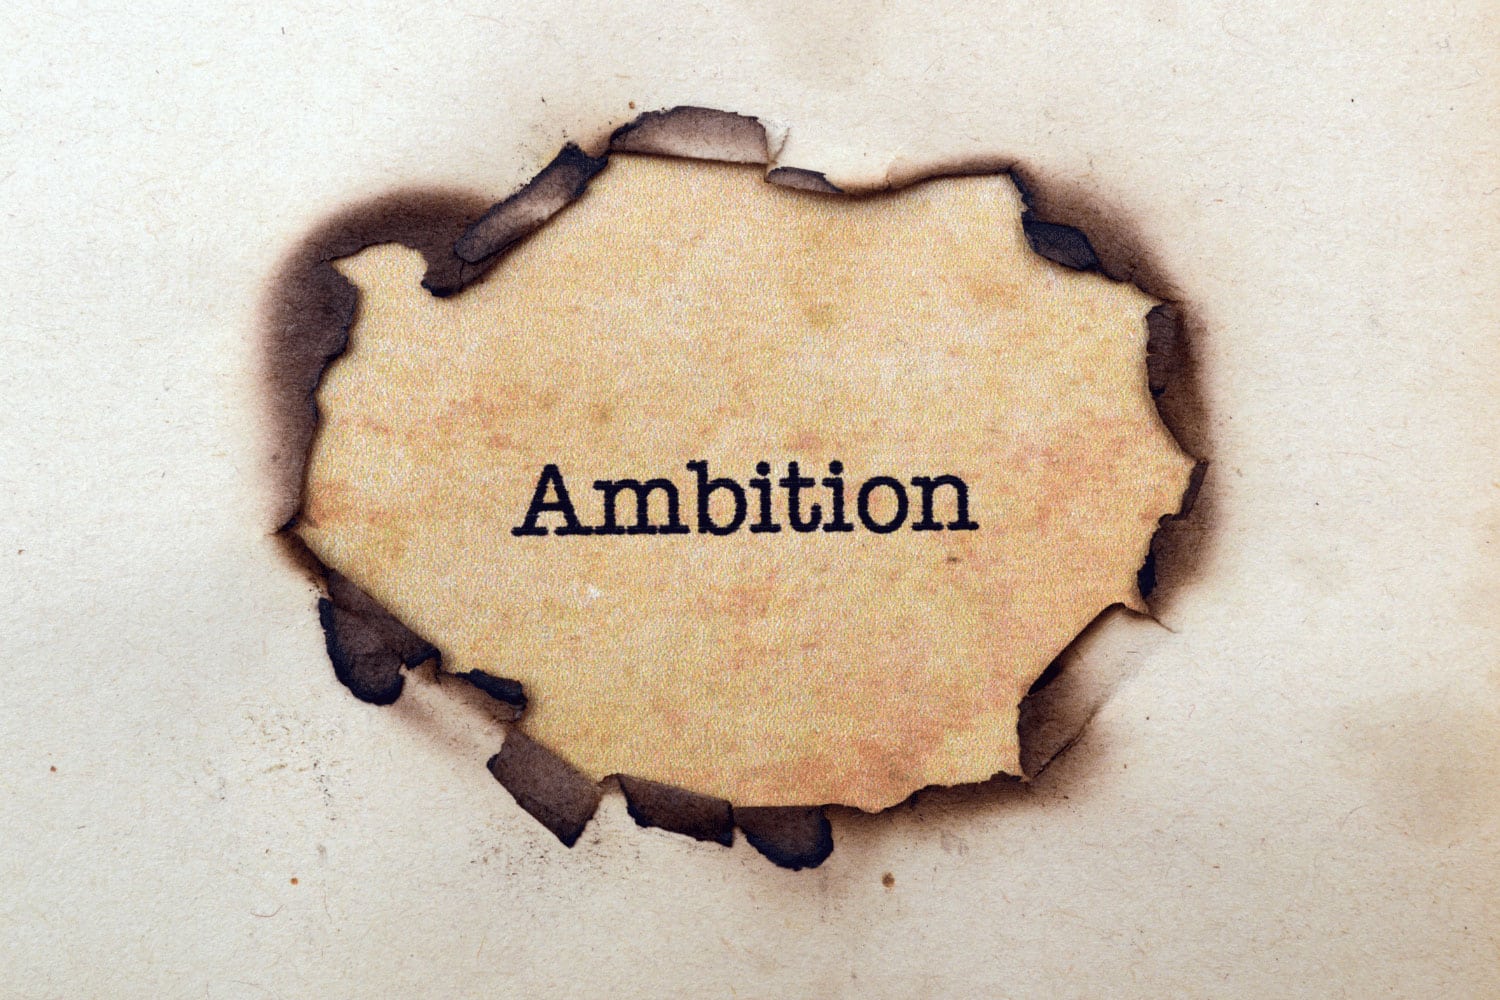 paper with hole burned in it revealing the word Ambition